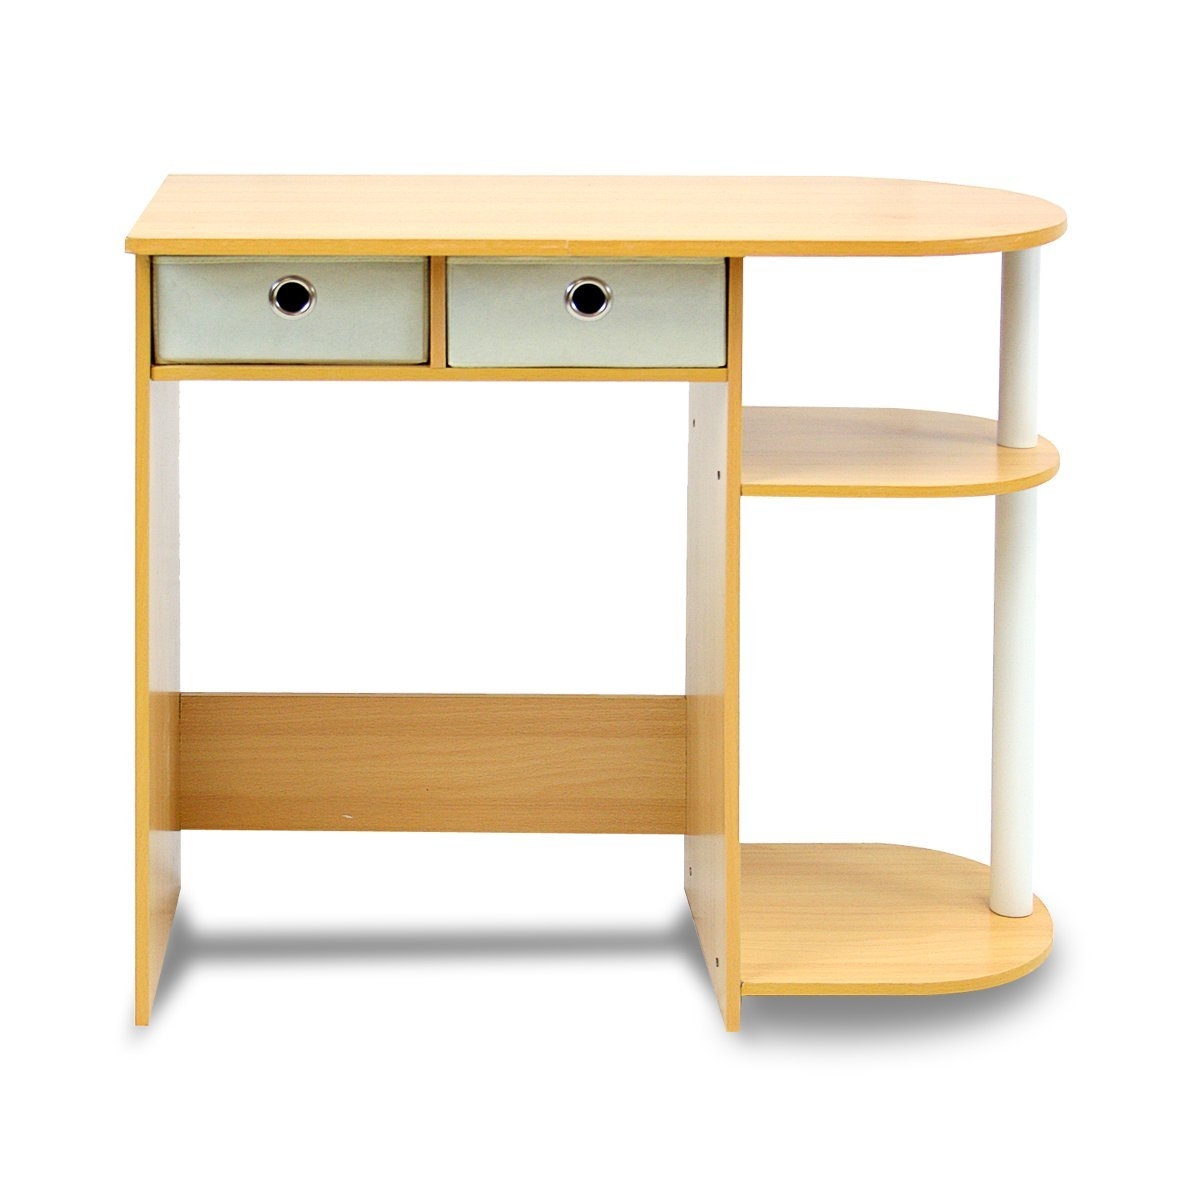 CreativeWorks Home Decor - COMPUTER DESKS - This Home Office Laptop Computer Desk Table in Beech Ivory is designed for  space saving and